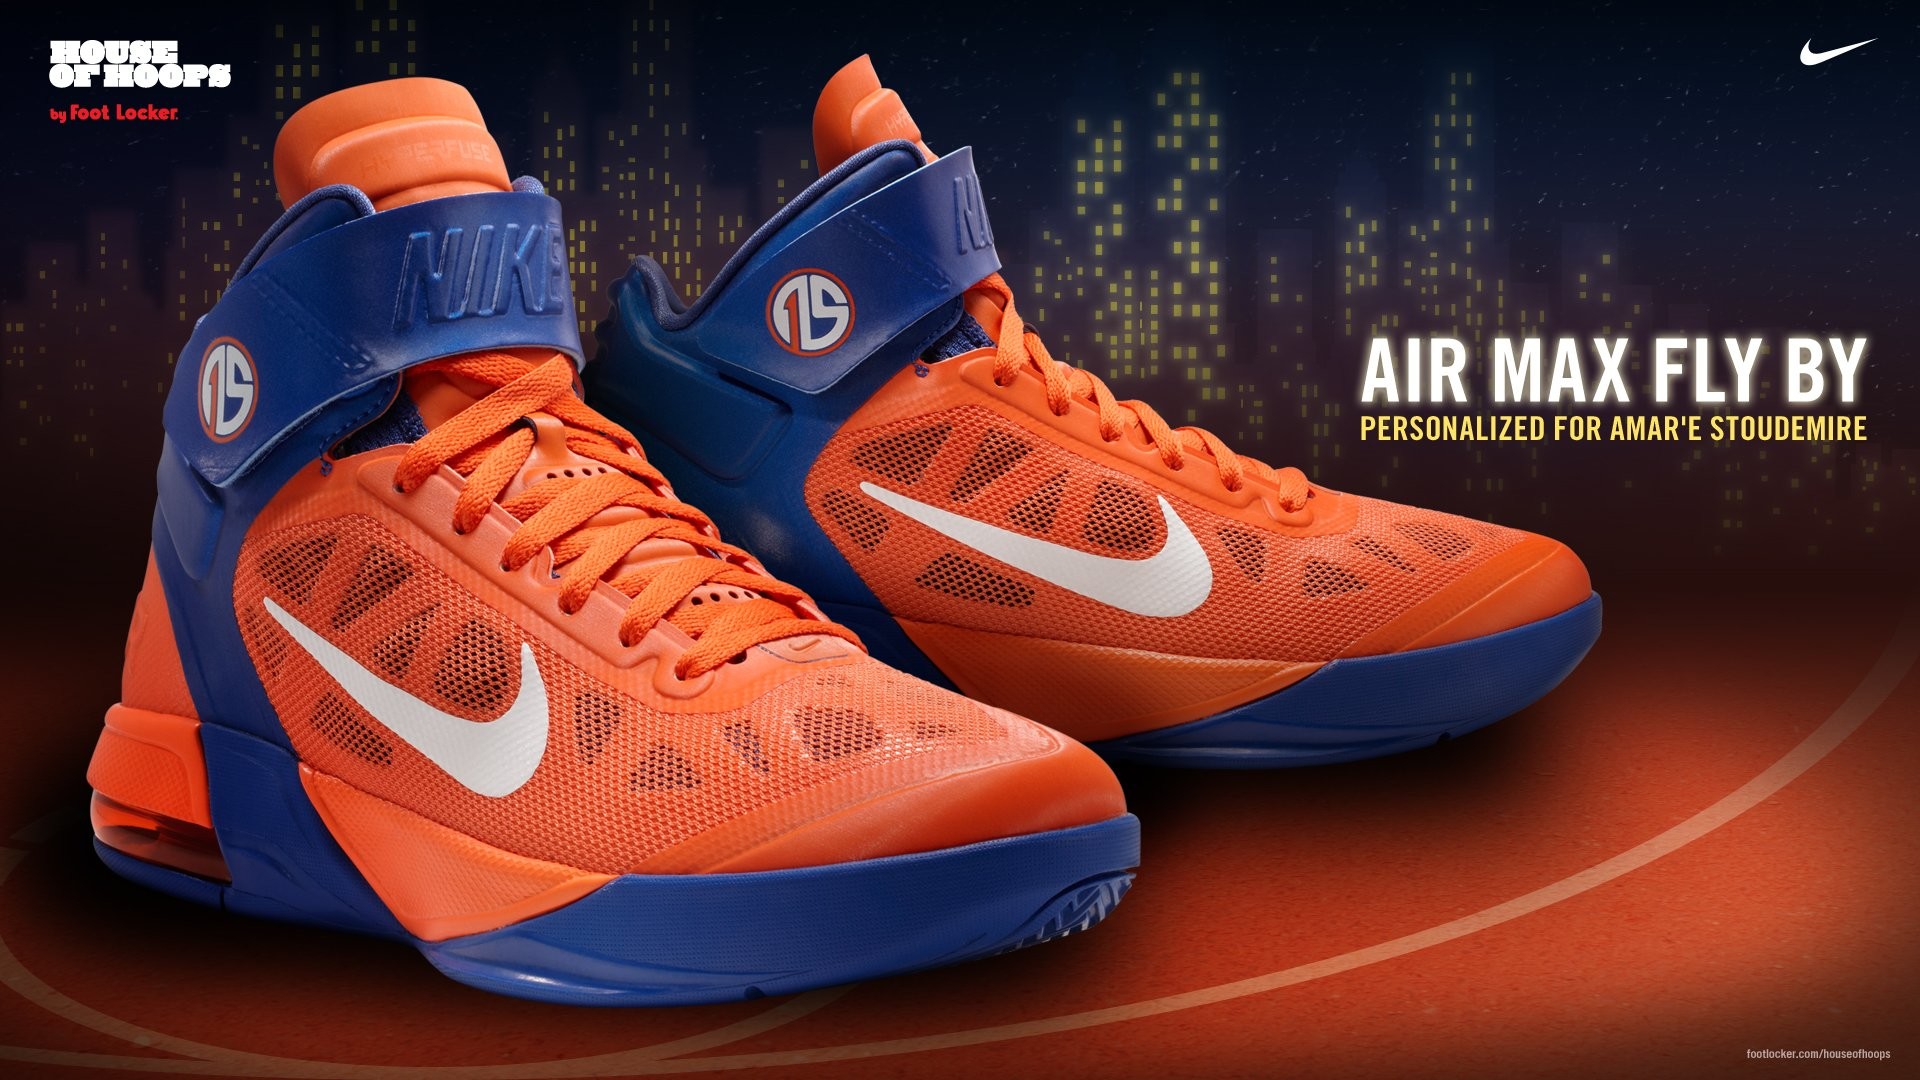 1920x1080 Nike Air Max Fly By Amare Stoudemire